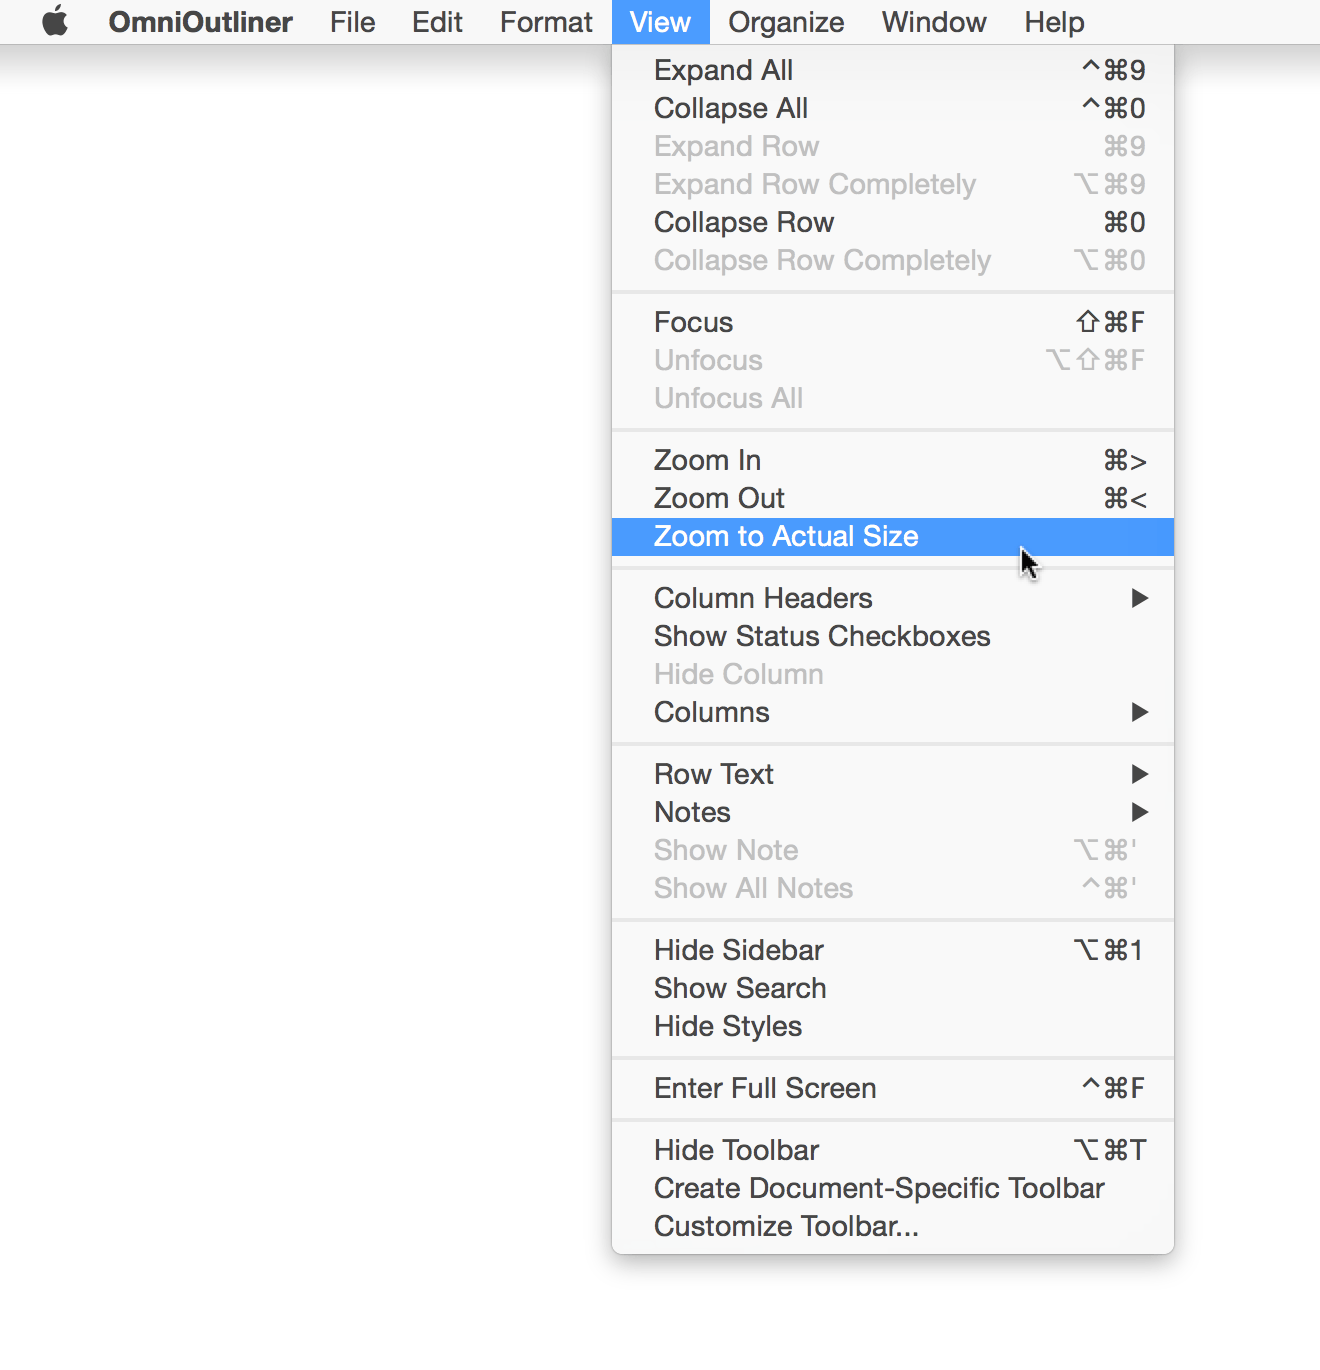 The Zoom to Actual Size menu option resides in the View menu